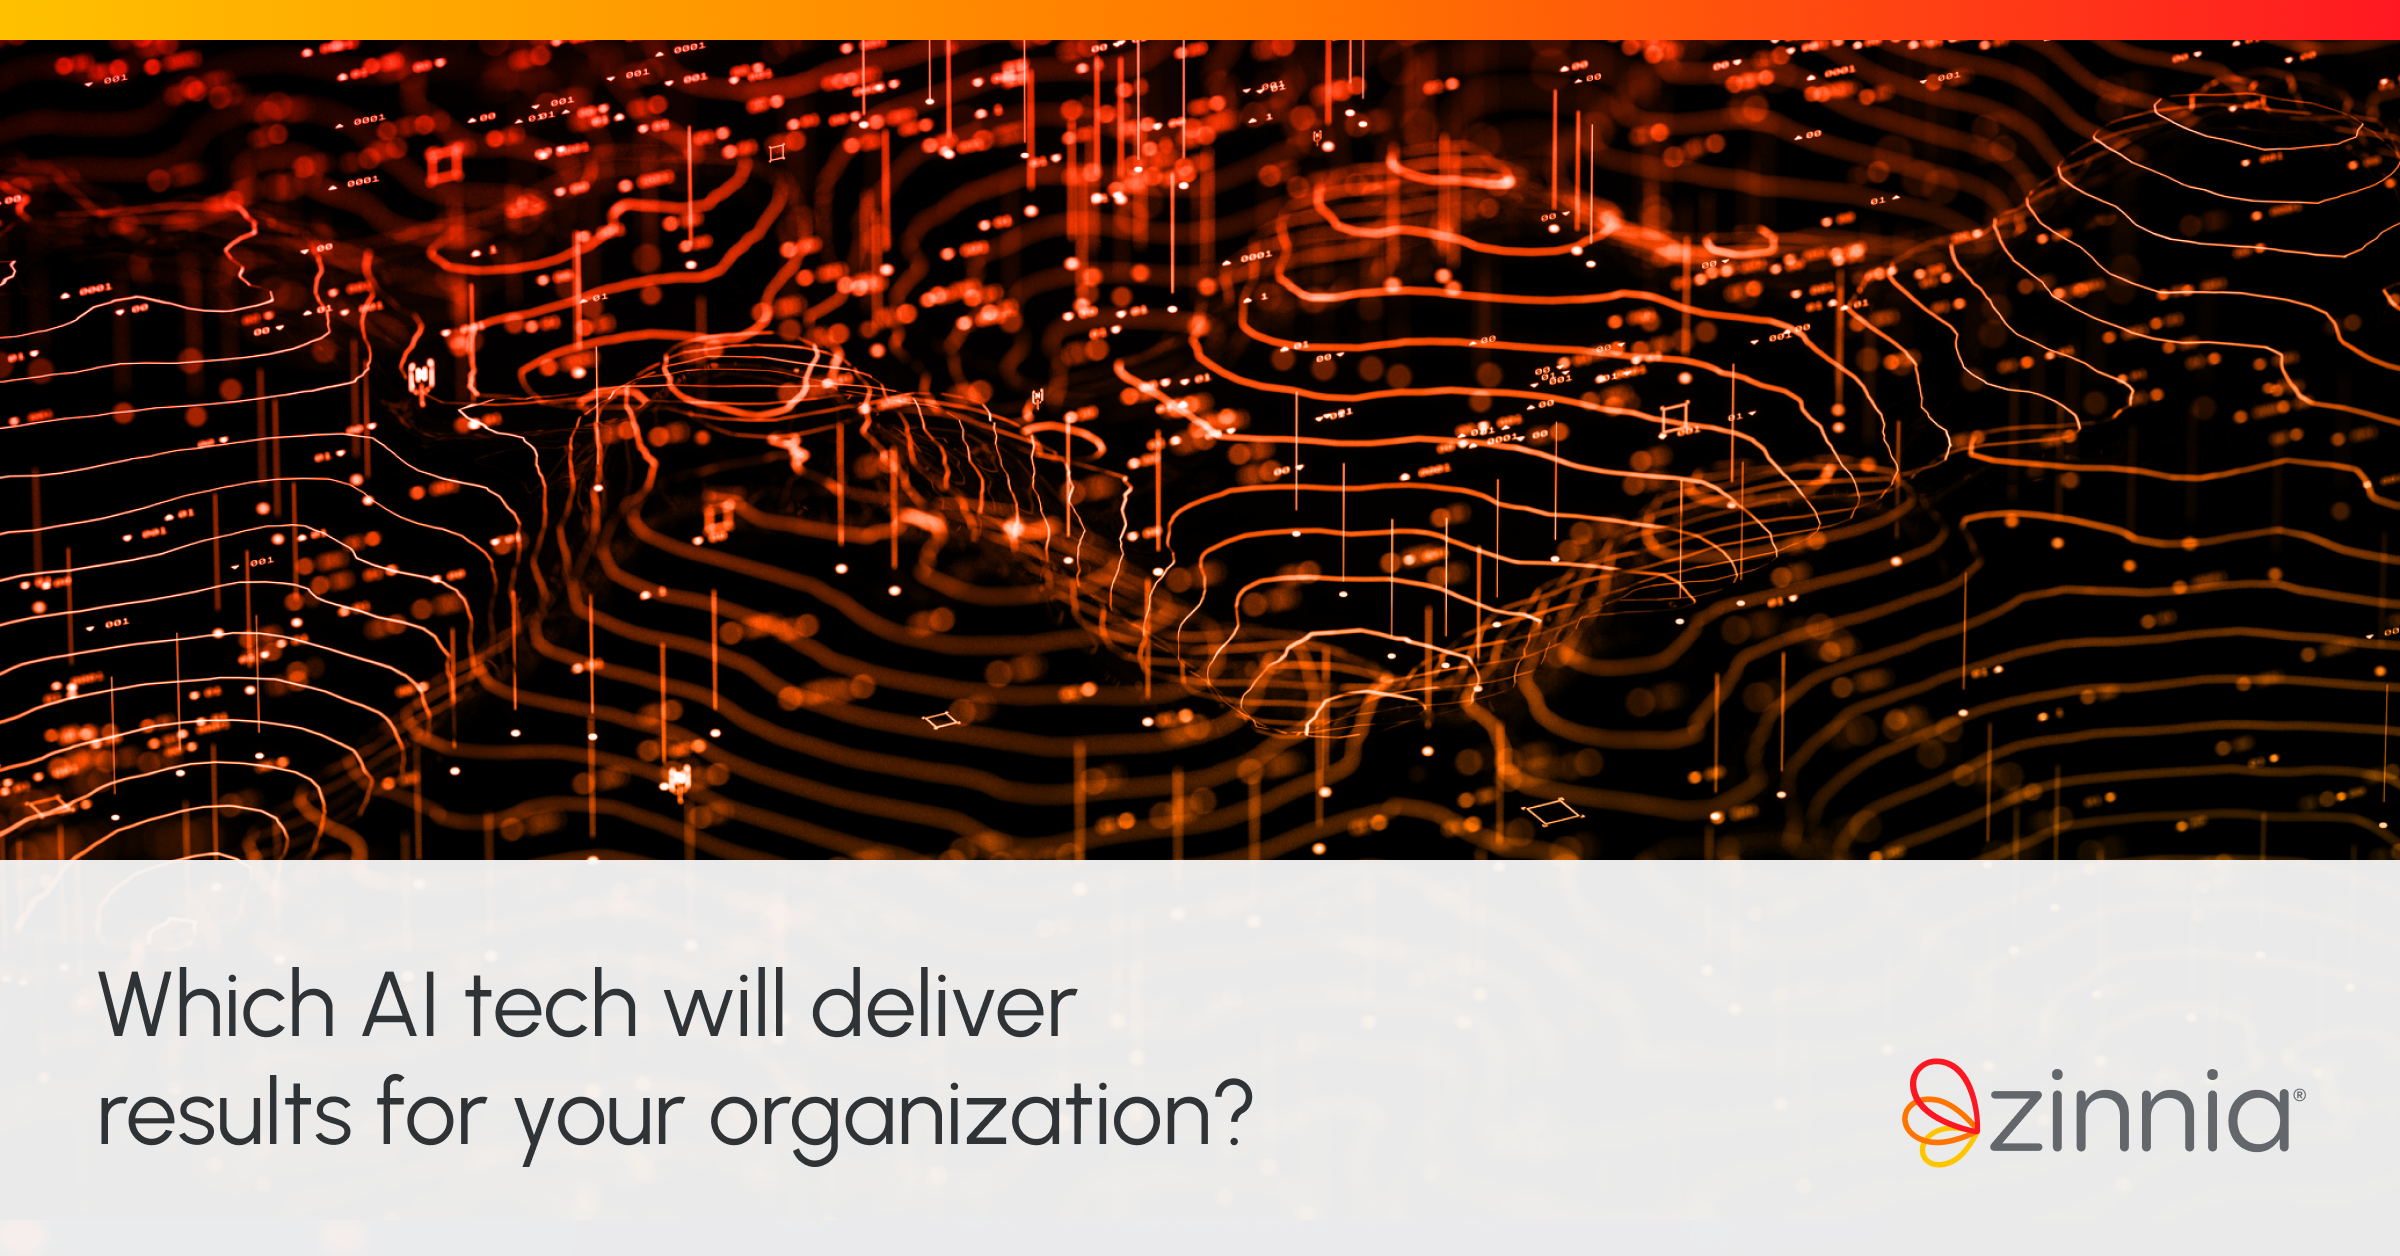 Digital visualization of AI technology with an abstract network pattern in orange and black colors, accompanied by the text 'Which AI tech will deliver results for your organization?' and the Zinnia logo.